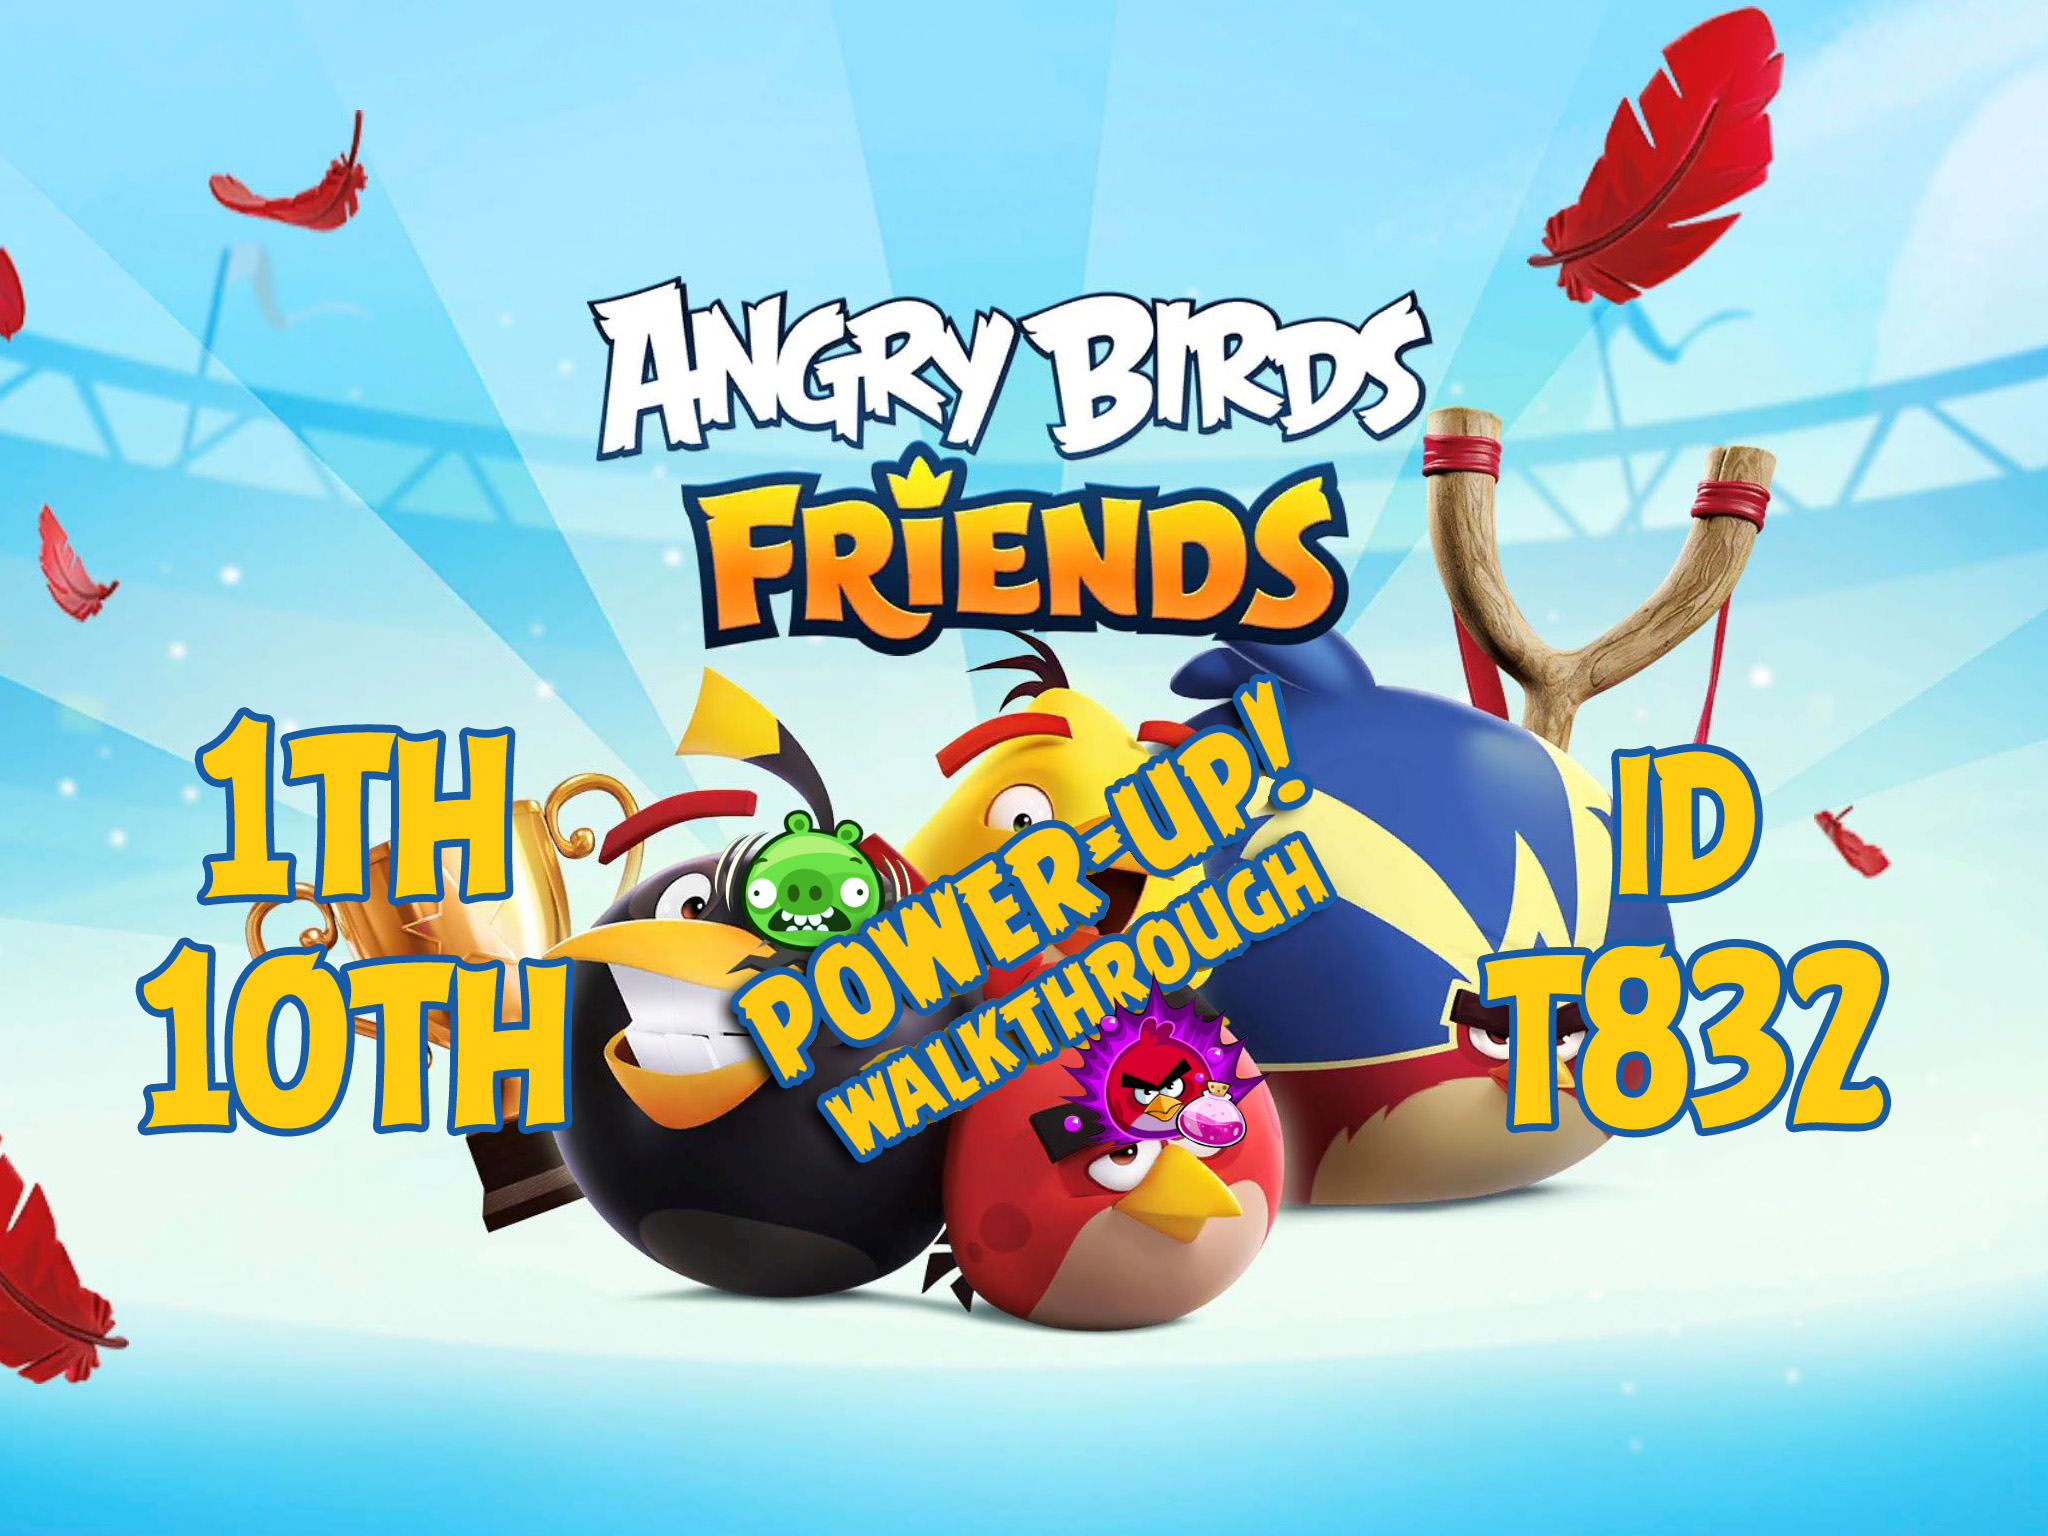 Angry-Birds-Friends-Tournament-T832-Feature-Image-PU